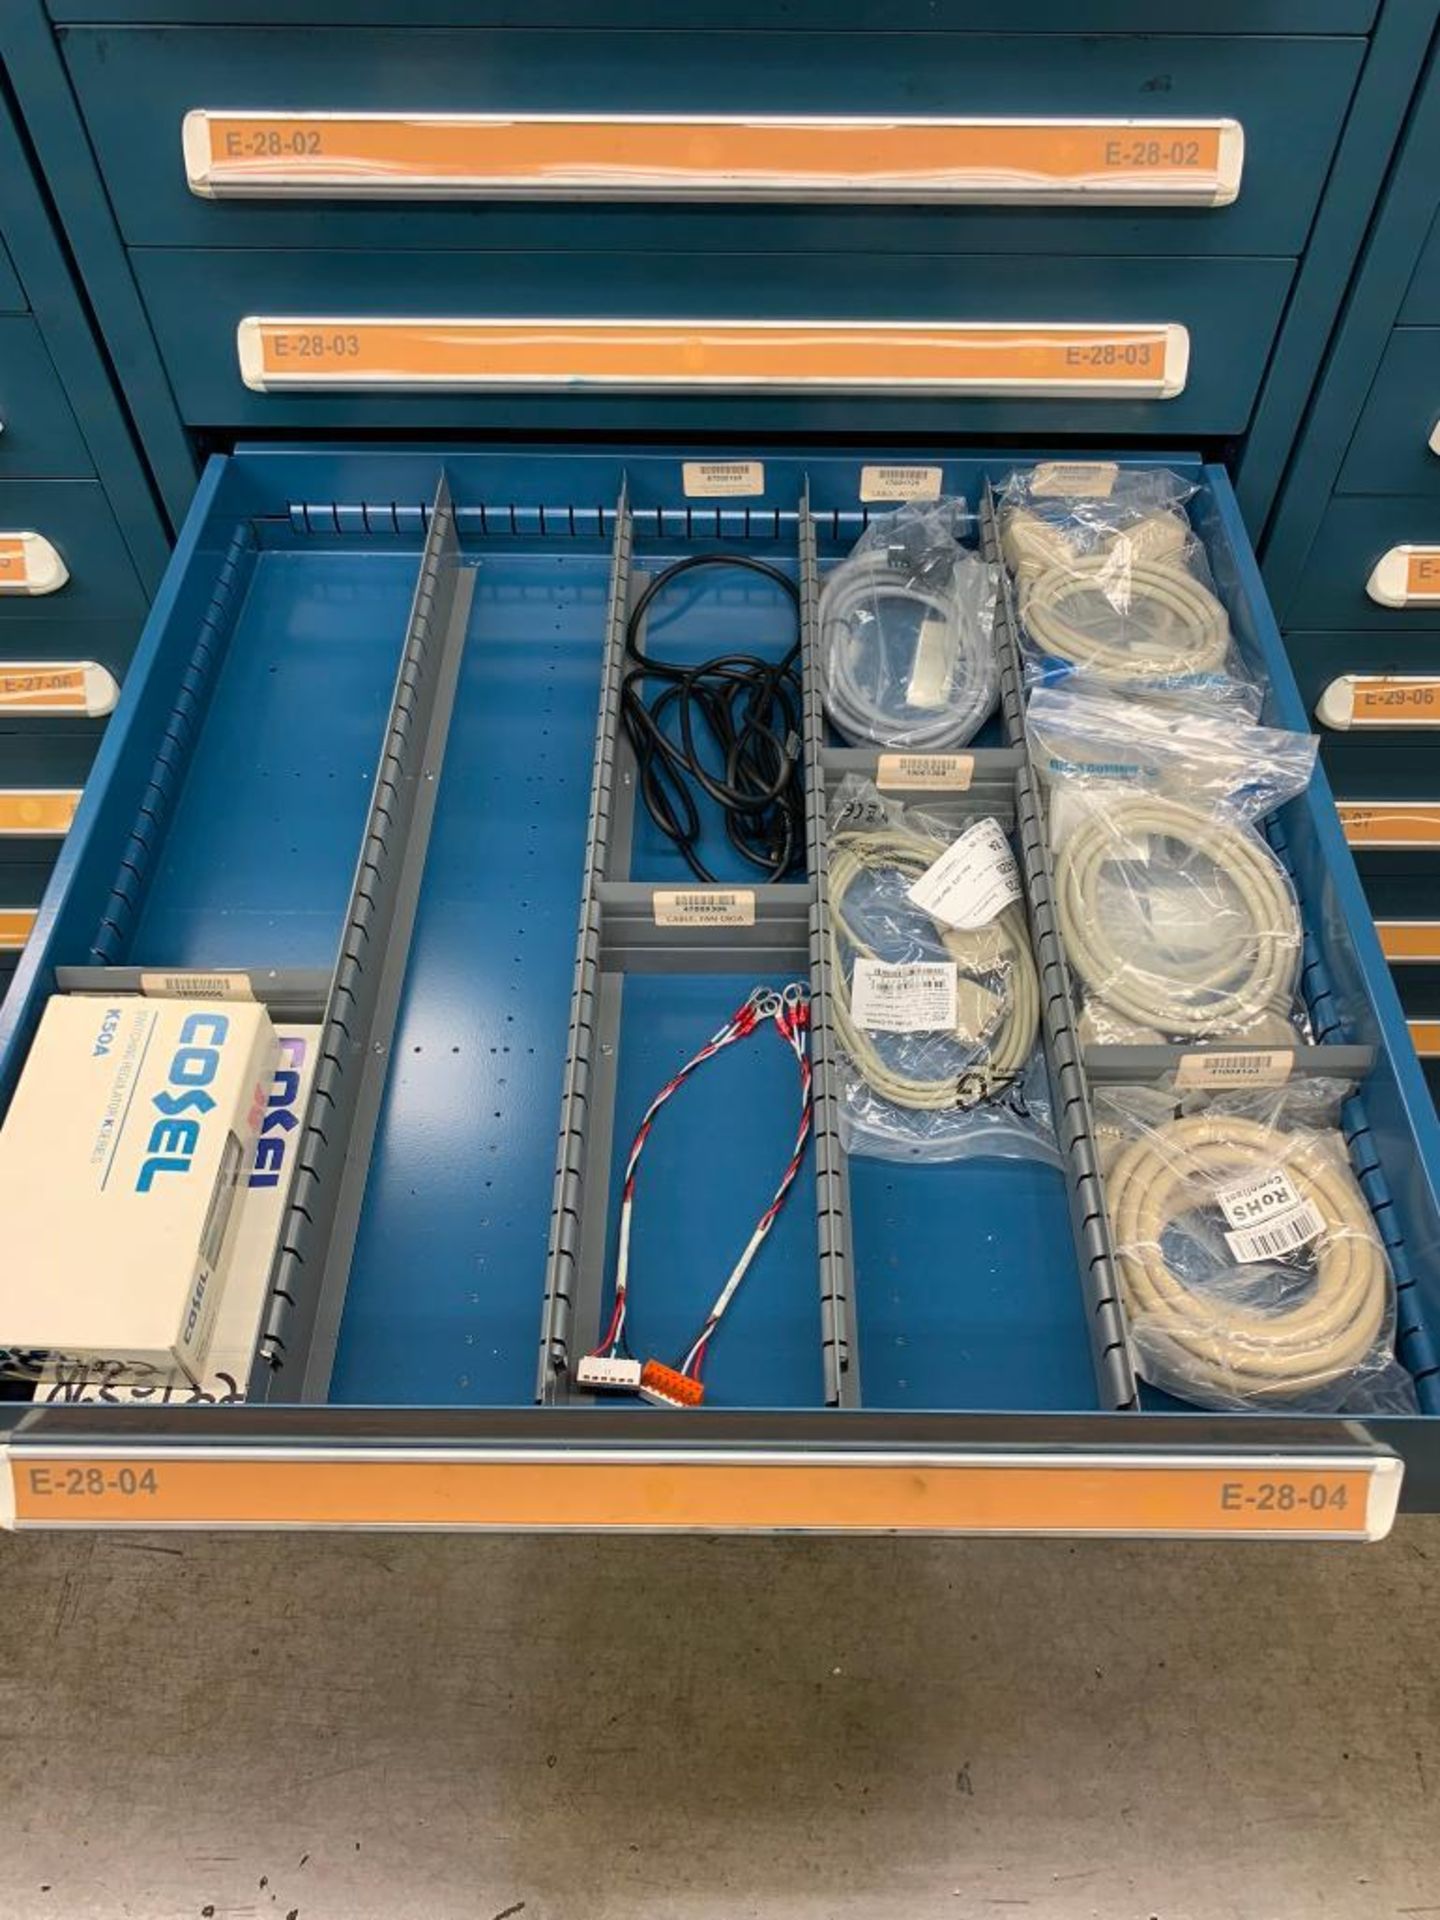 Vidmar 10-Drawer Cabinet w/ Assorted Cable Assemblies, Timers, Wire Harnesses - Image 7 of 16